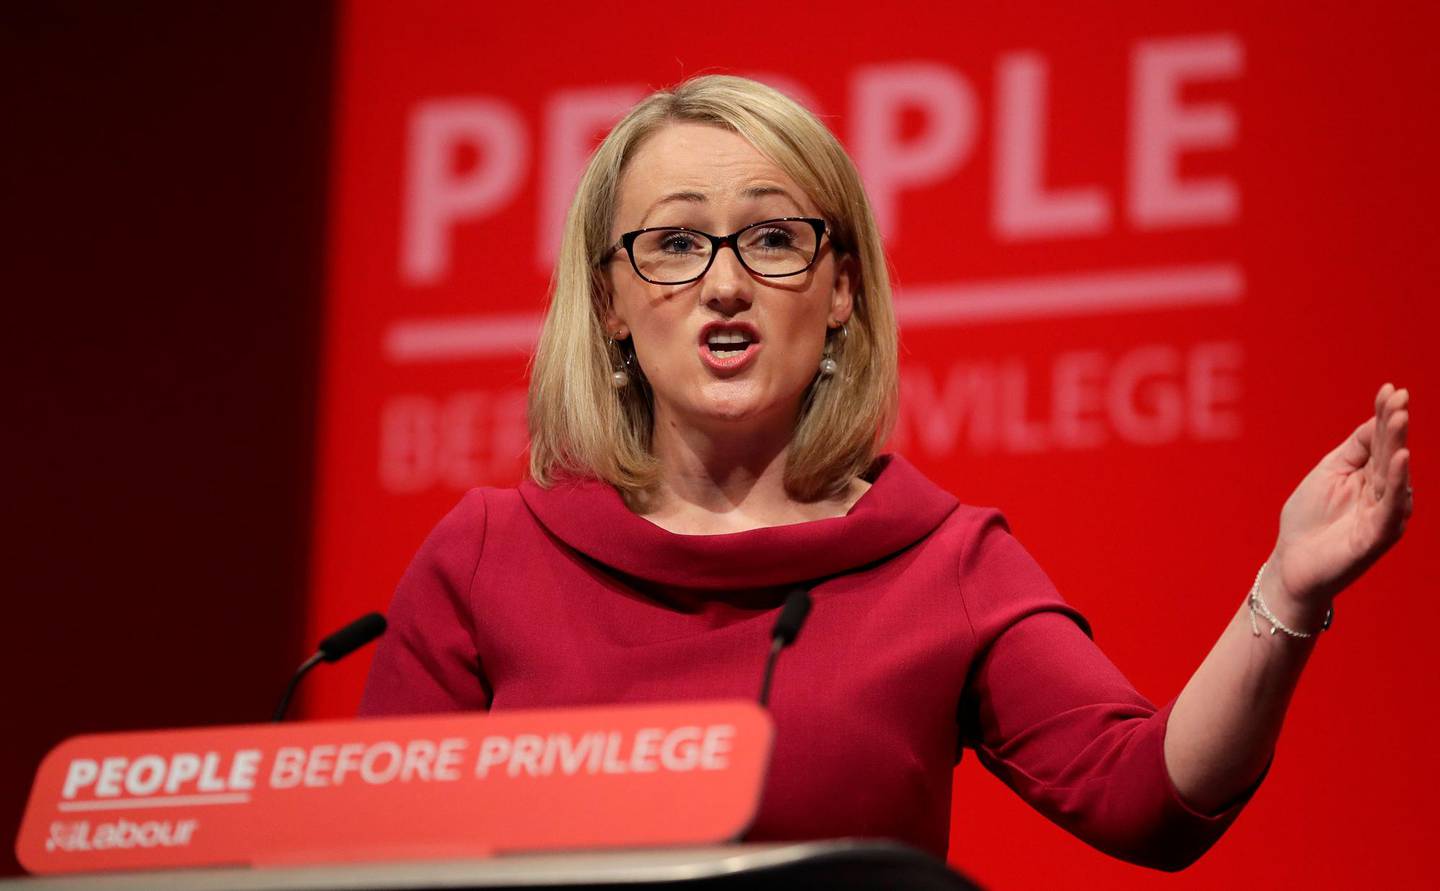 Rebecca Long-Bailey, Britain's Shadow Business secretary speaks on stage during the Labour Party Conference at the Brighton Centre in Brighton, England, Tuesday, Sept. 24, 2019. (AP Photo/Kirsty Wigglesworth)